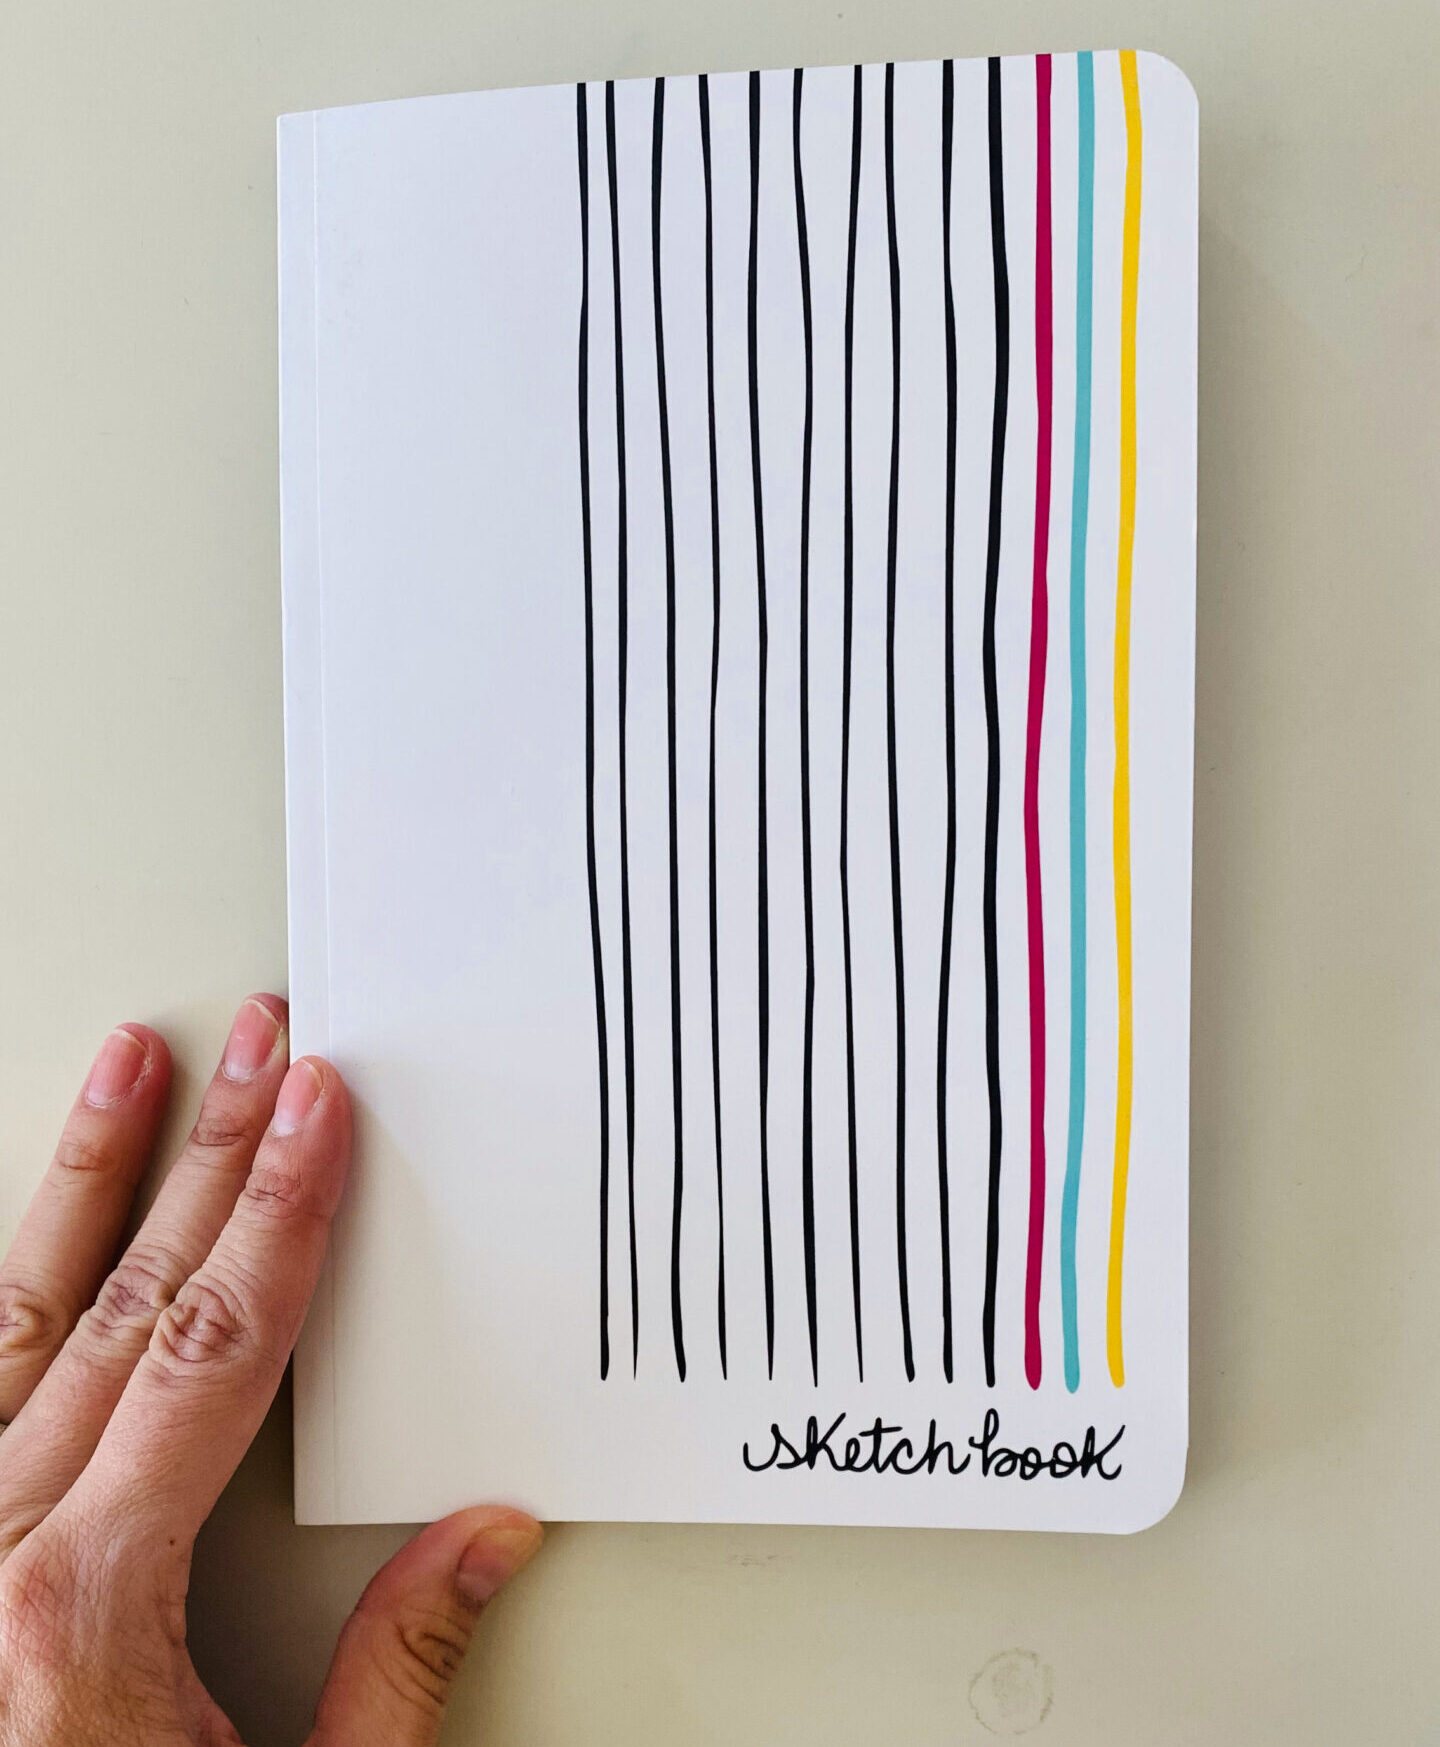 10-Square Grid Sketchbook for Your Bad*ss Designs: Draw Your Own